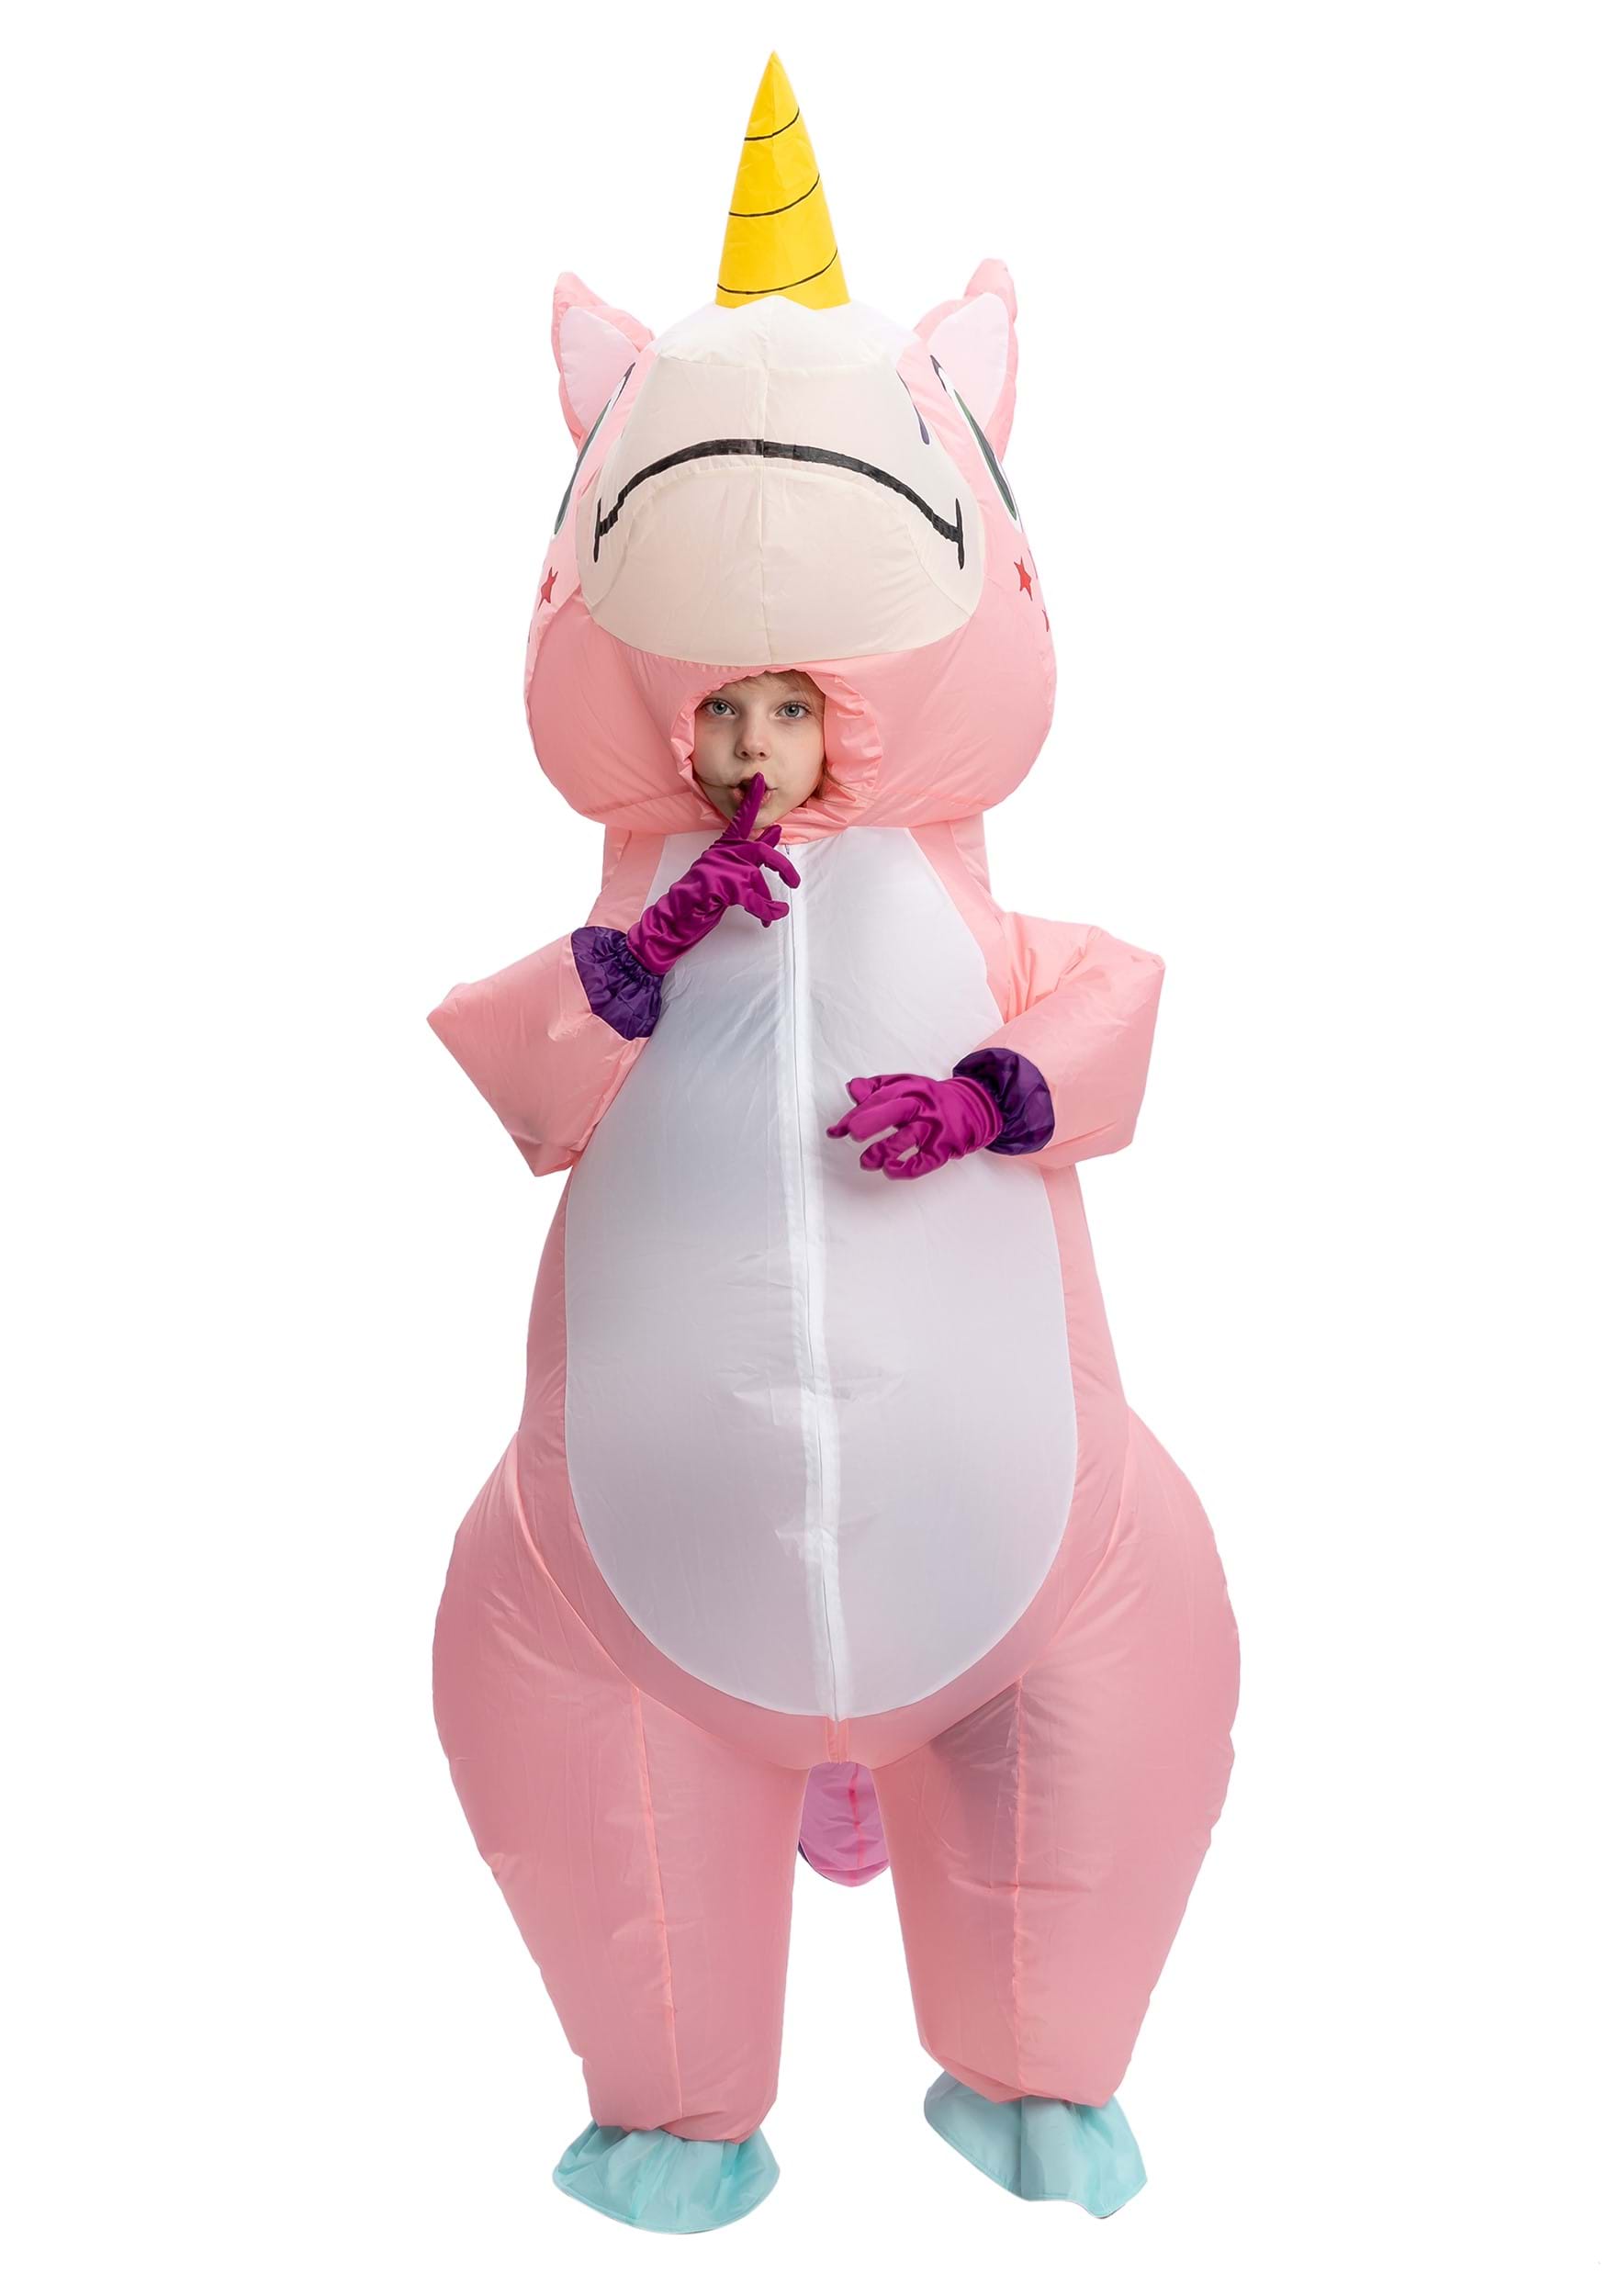 Inflatable Pink Unicorn Costume For A Child